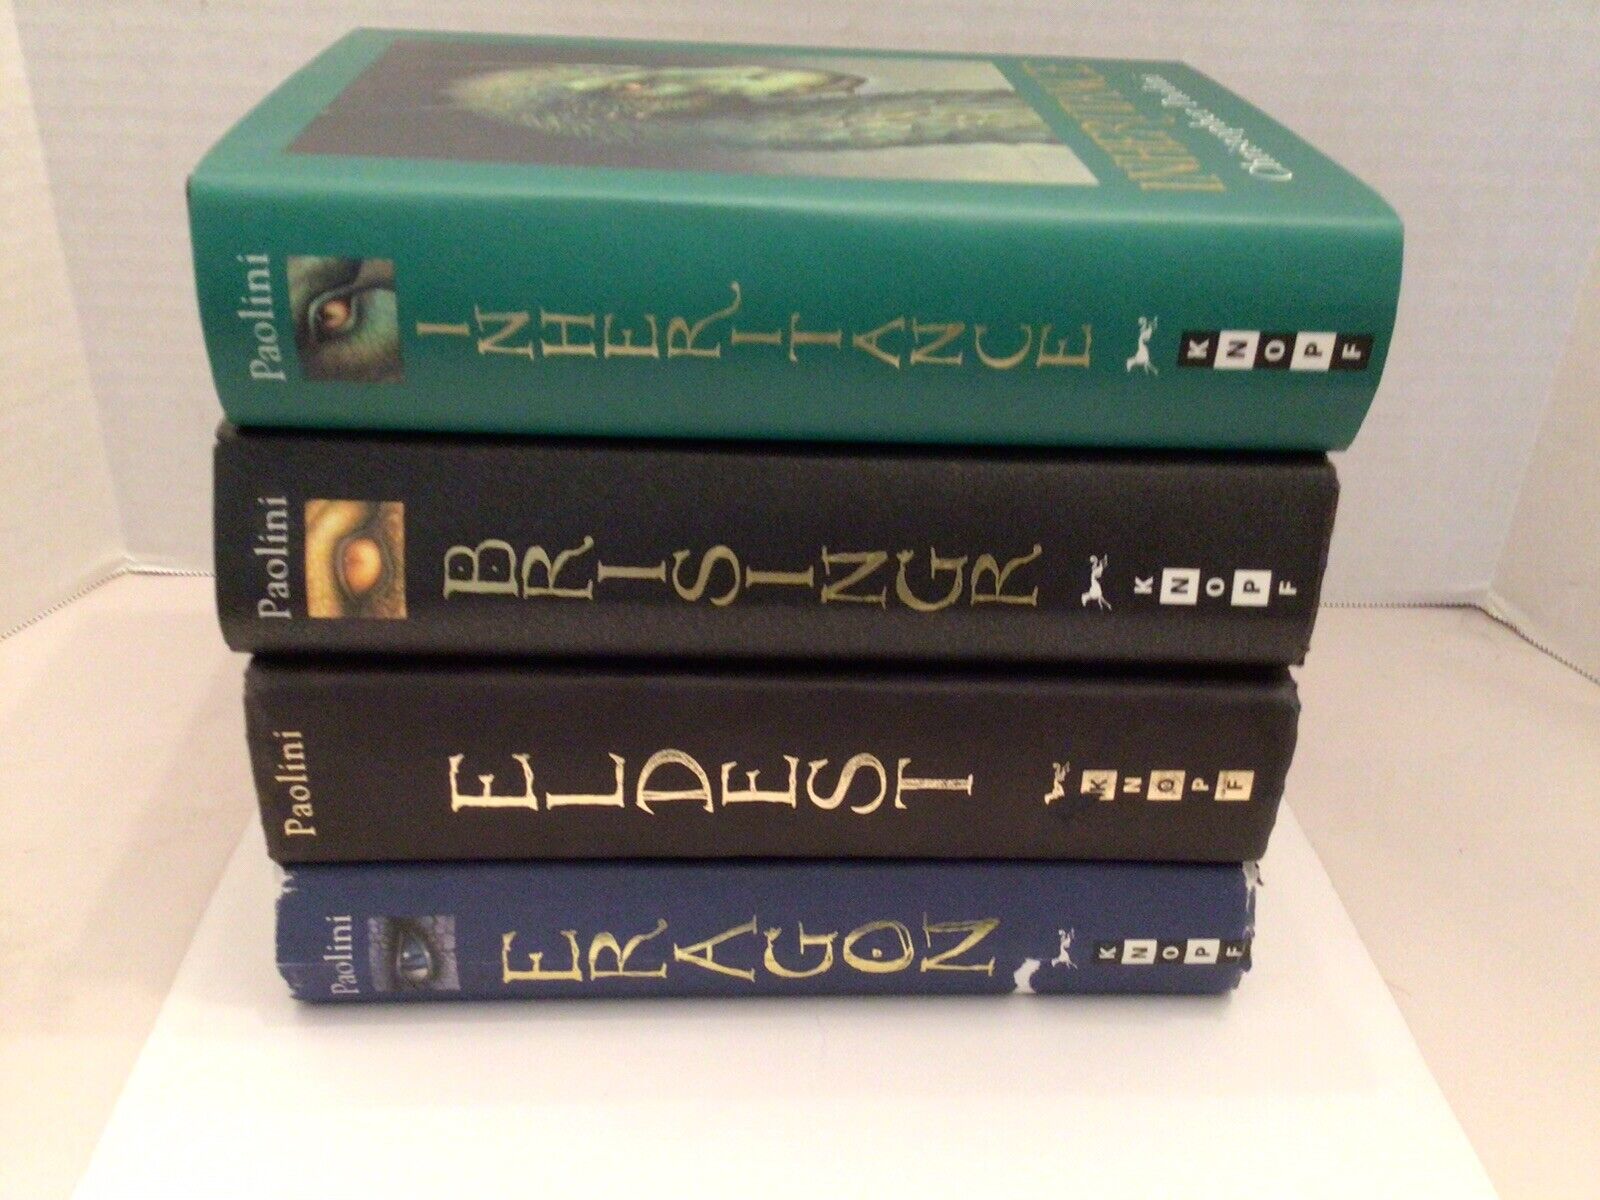 Eragon The Inheritance Series 1-4 Hard Cover Books 3 First Editions 3 Dustcovers